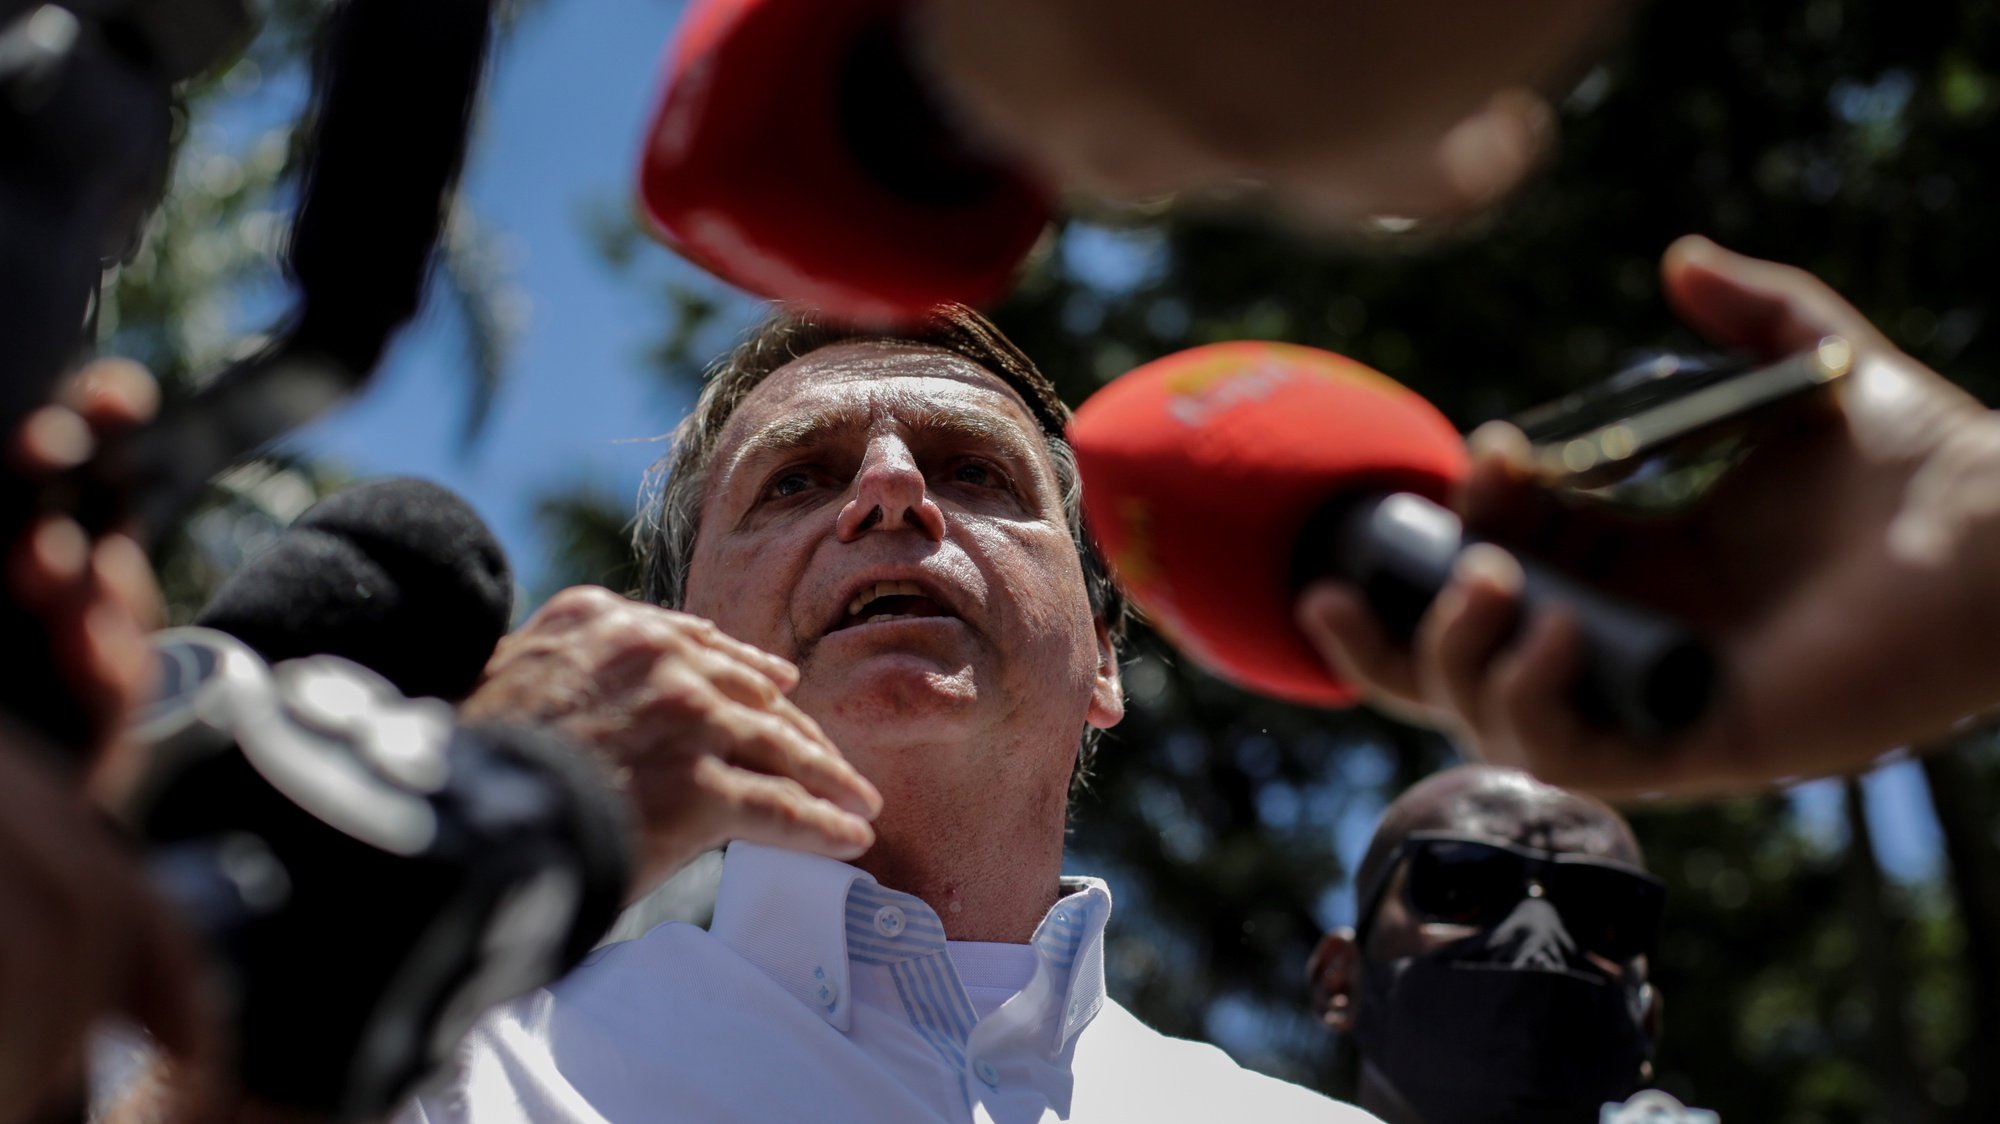 epa08851519 Brazilian President Jair Bolsonaro makes a statement after voting during the second round of Municipal elections at a polling station in Rio de Janeiro, Brazil, 29 November 2020. Brazil is holding the second round of municipal elections in the country on 29 November.  EPA/ANTONIO LACERDA